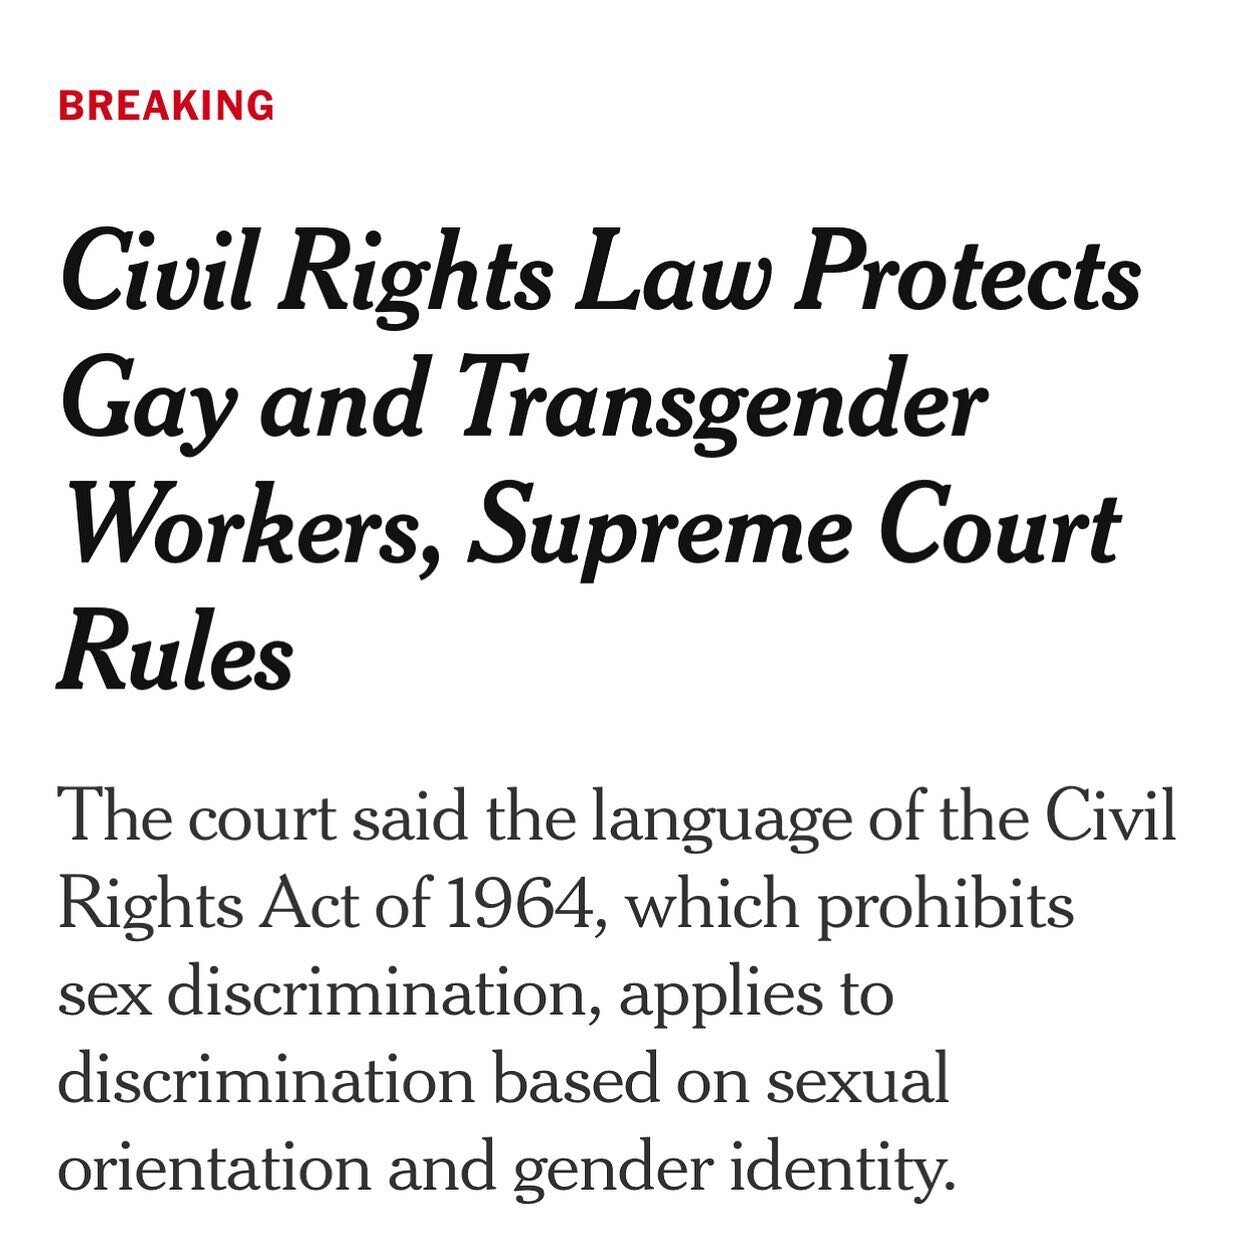 Finally, a bit of good news. It&rsquo;s especially heartening that it was a 6-3 decision. Of course, one wishes for unanimity when it comes to civil rights for all. #civilrights #gayrights #transrights #🌈 #supremecourtdecision #takethattrump